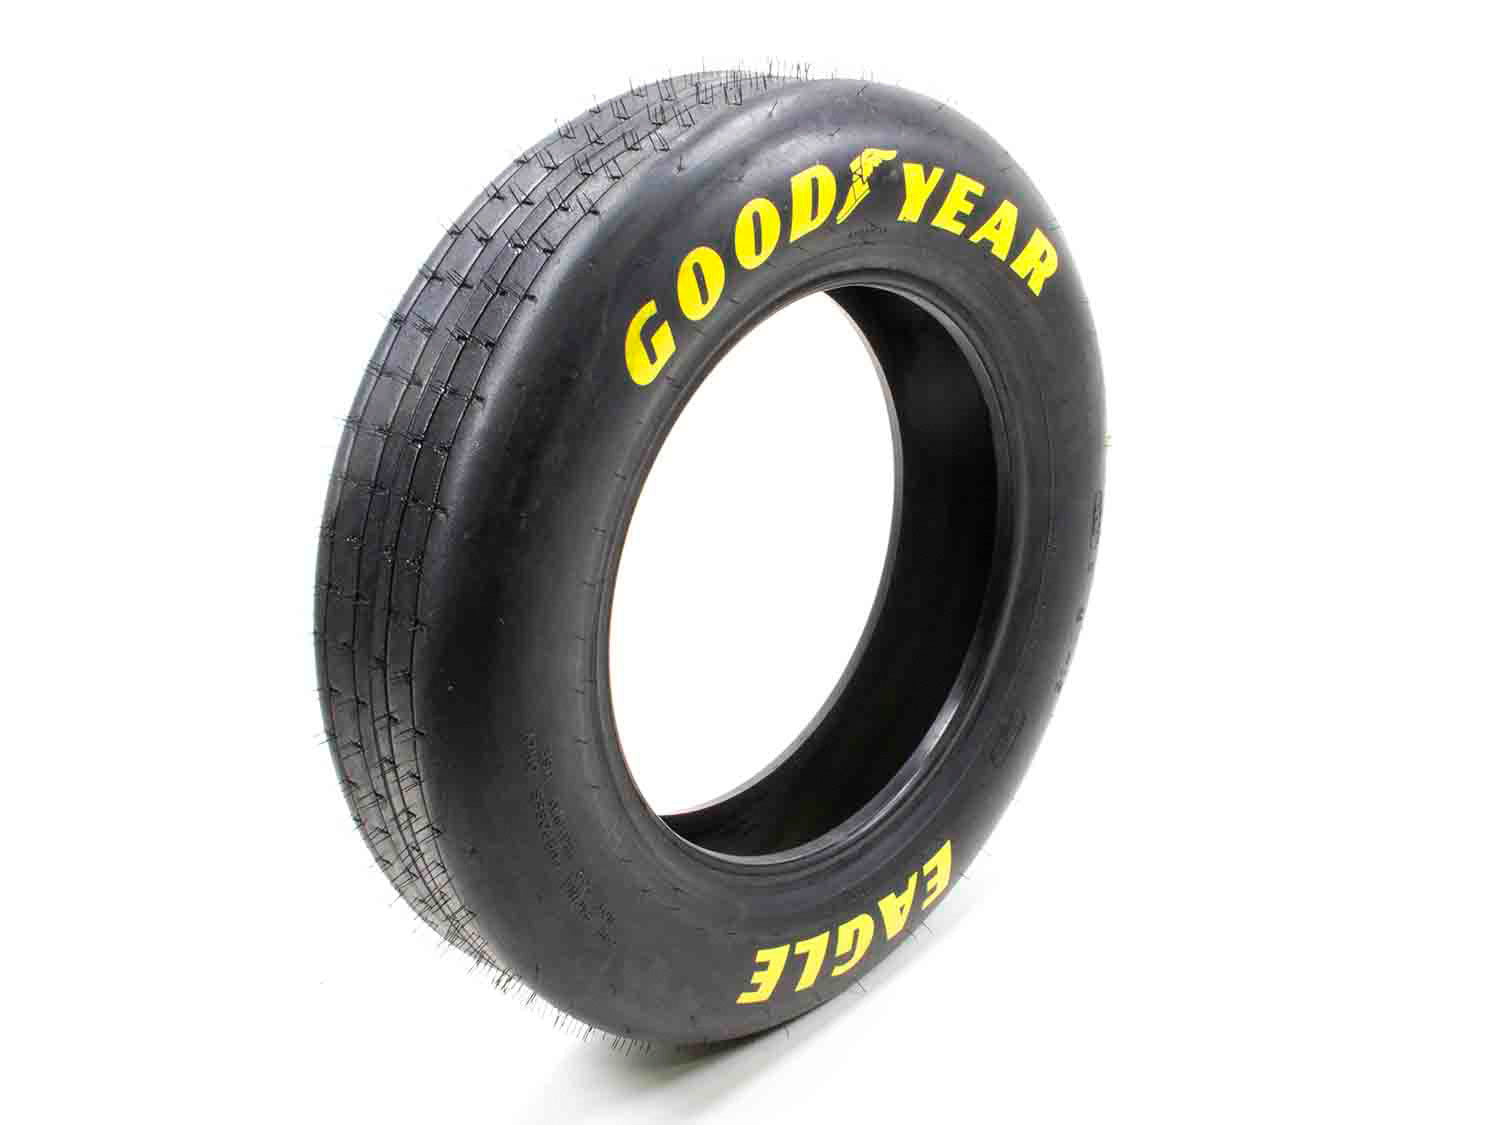 Goodyear 27.0/4.5-15 Front Runner GDYD1965